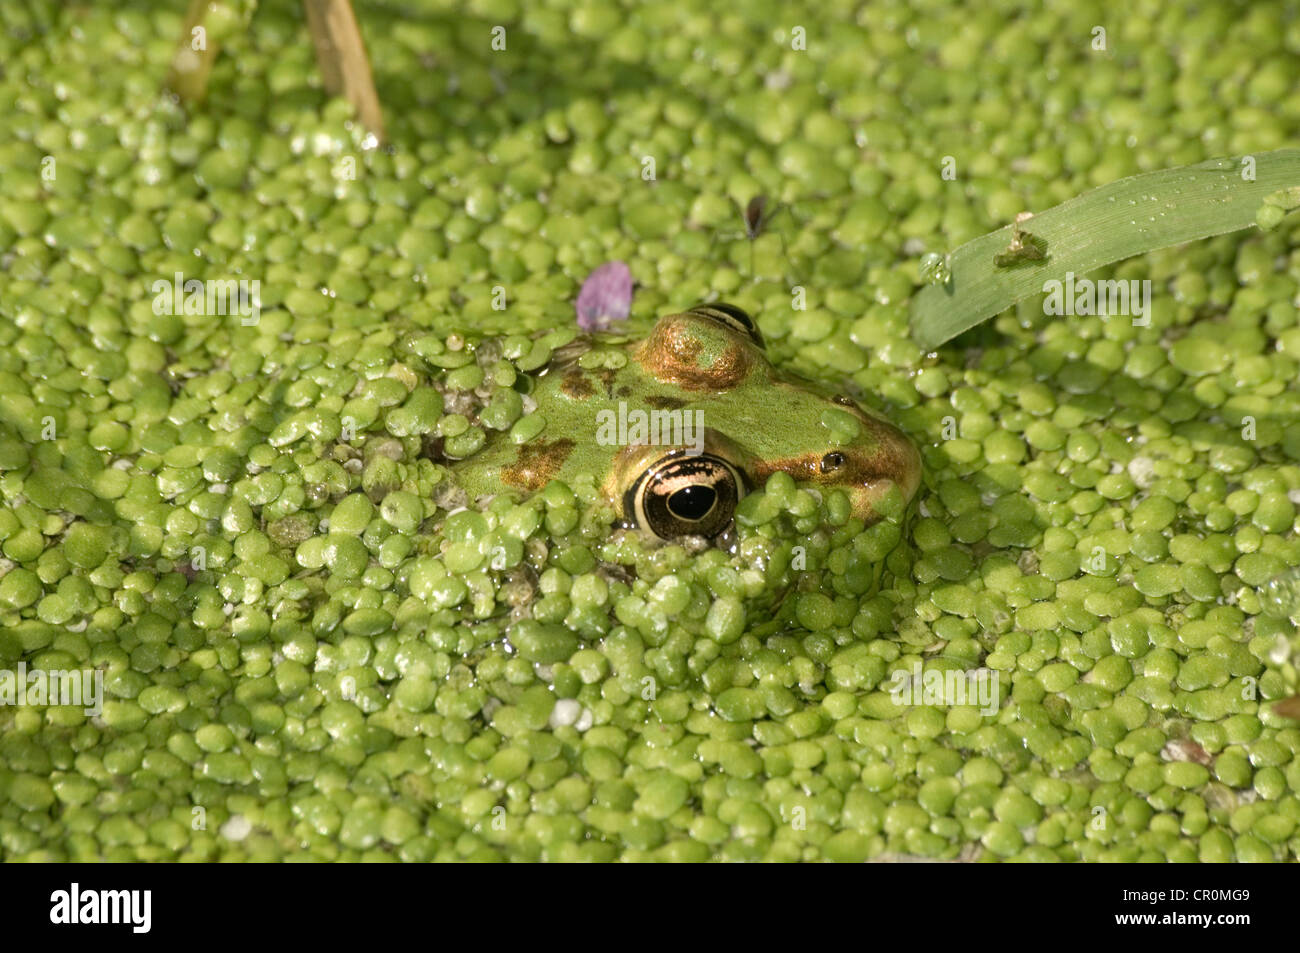 Water Frog (Rana sp.) in water covered with duckweed, Leptokaria, Greece, Europe Stock Photo